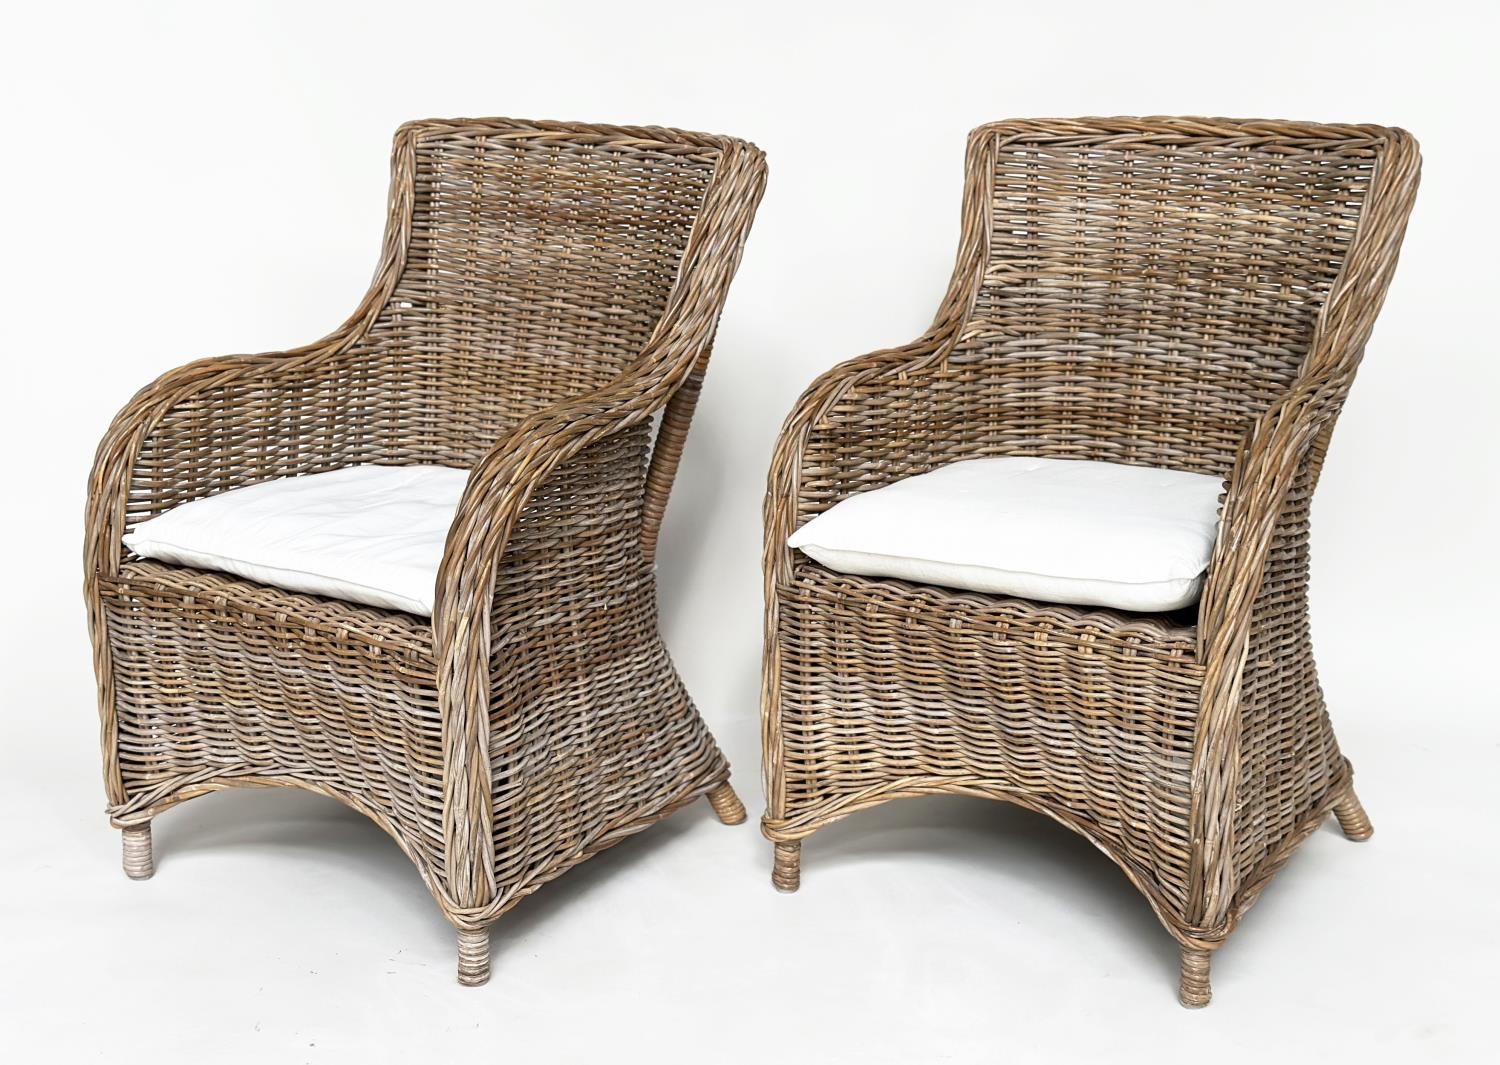 ORANGERY ARMCHAIRS, a pair, rattan framed and cane bound with cushions. (2) - Image 11 of 11